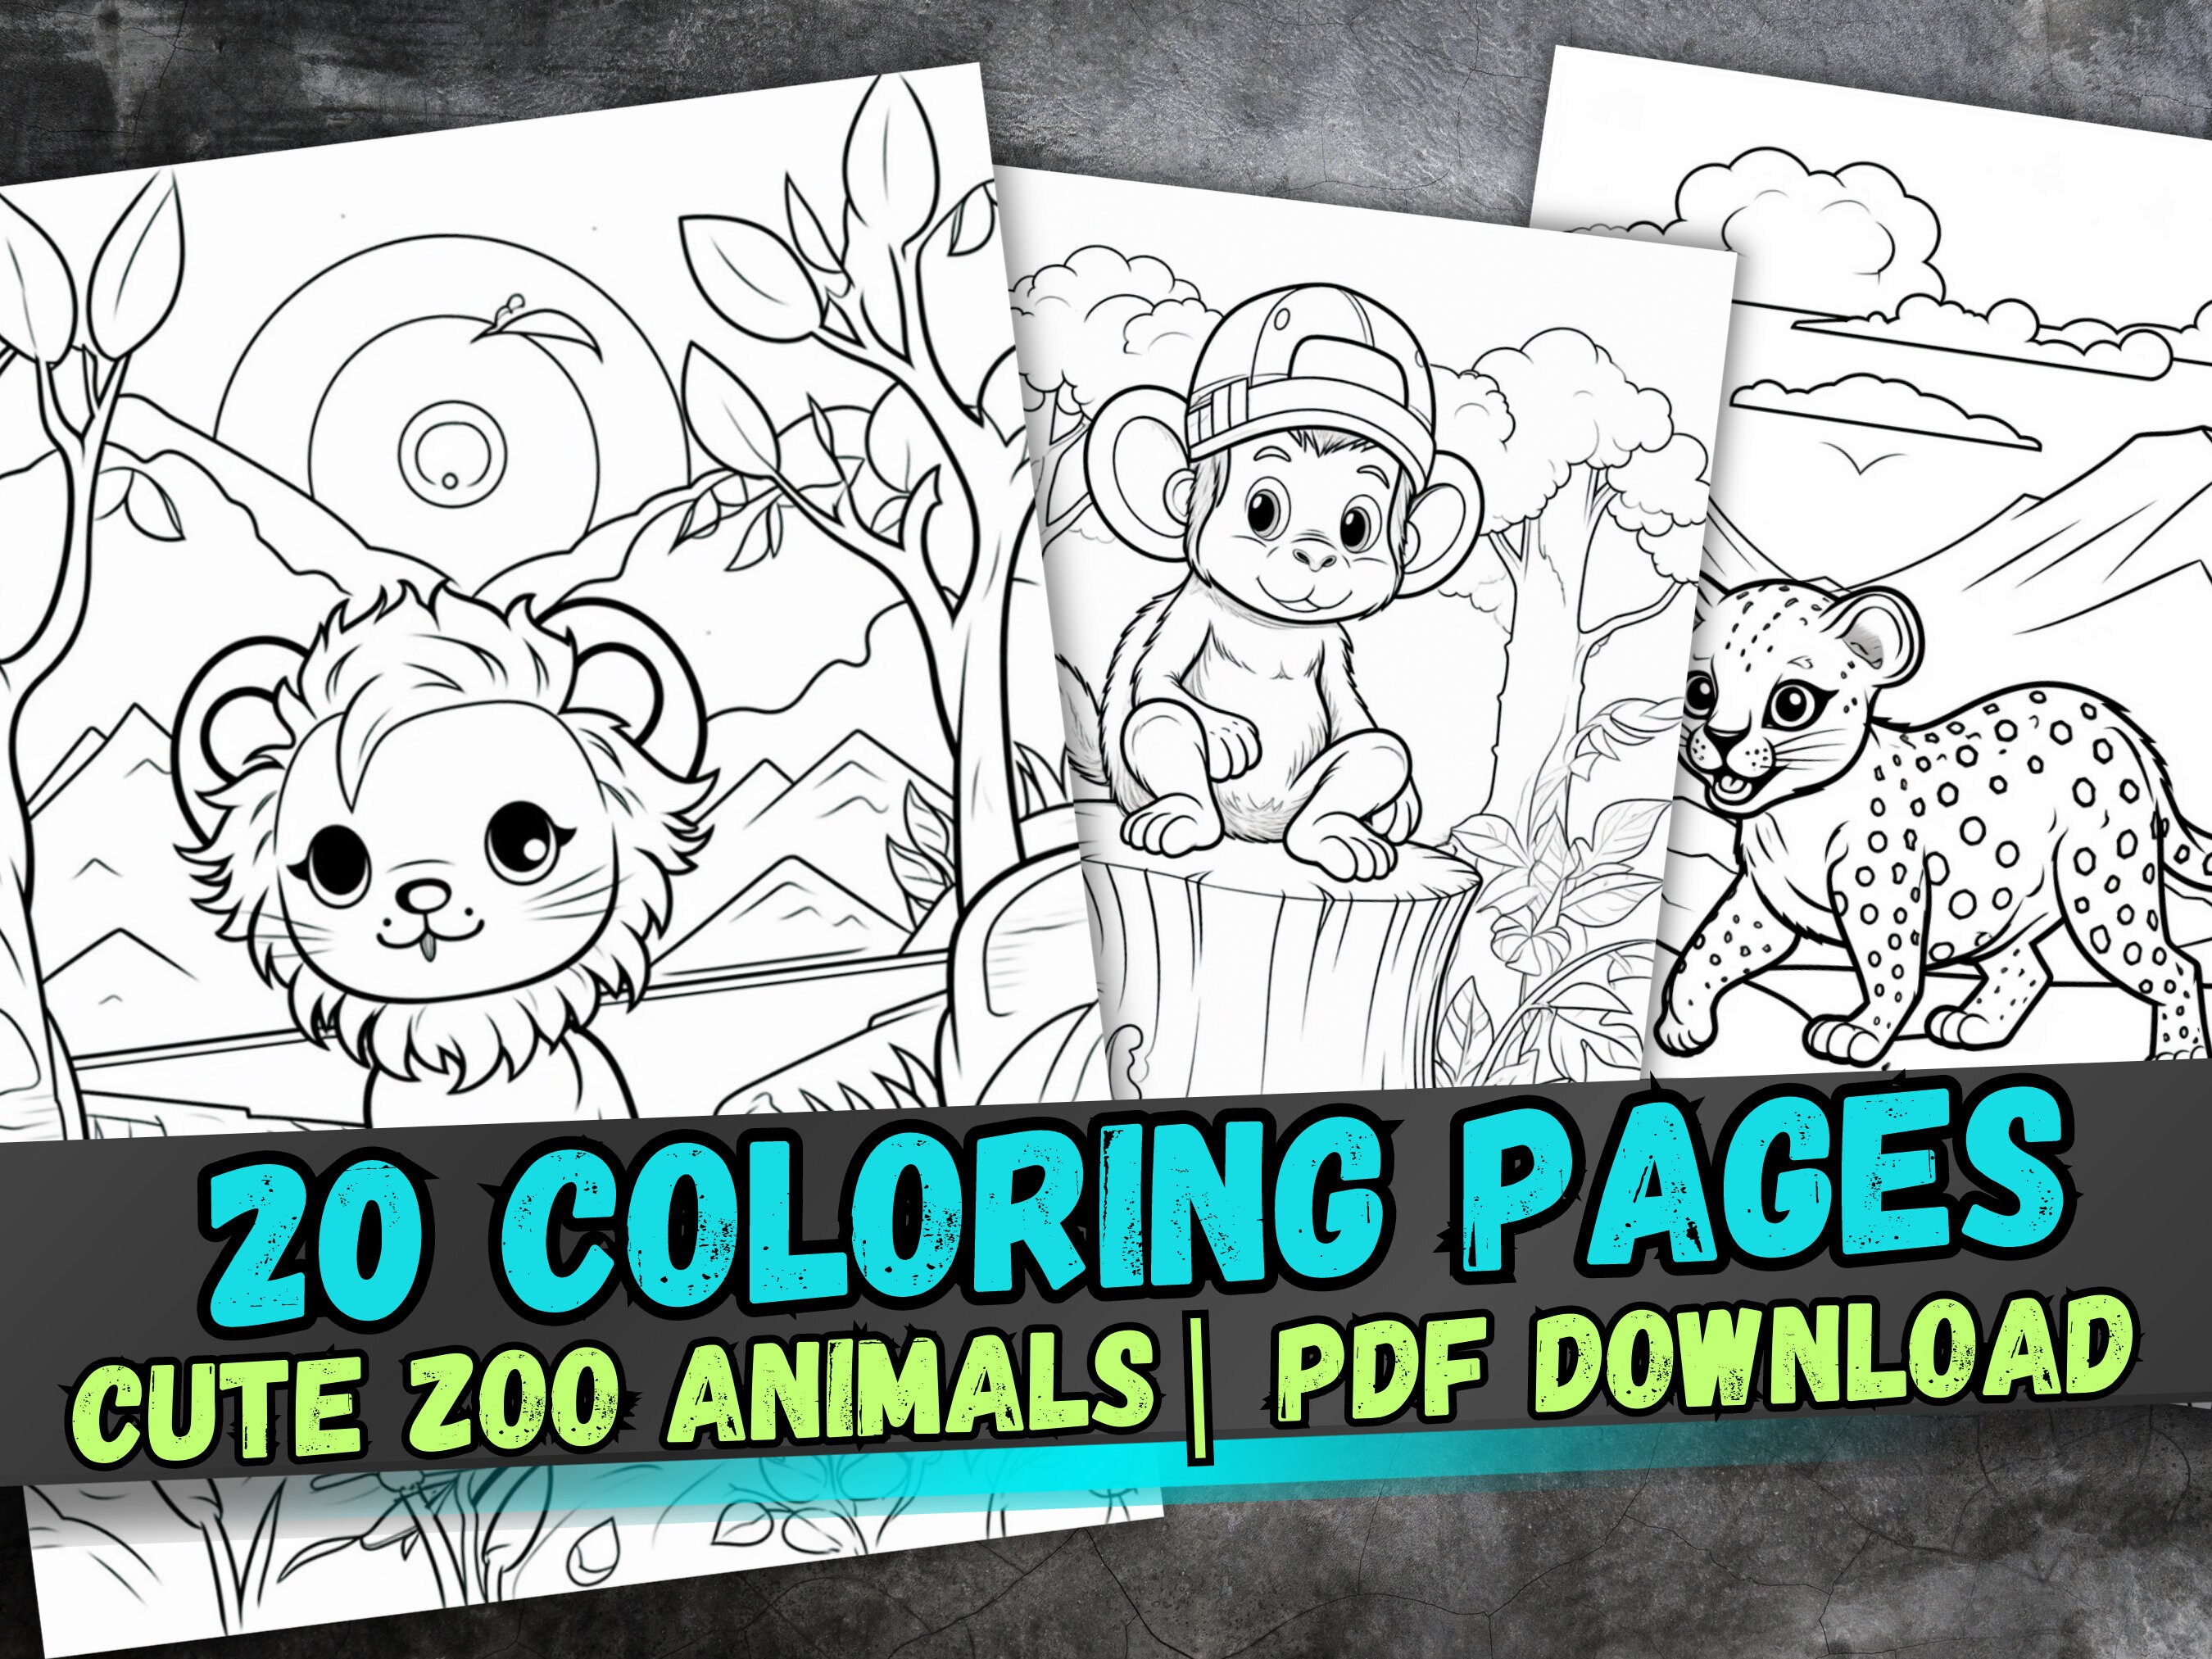 Cute zoo animal coloring pages perfect for kids and adults fun and relaxing activity for home or classroom instant download